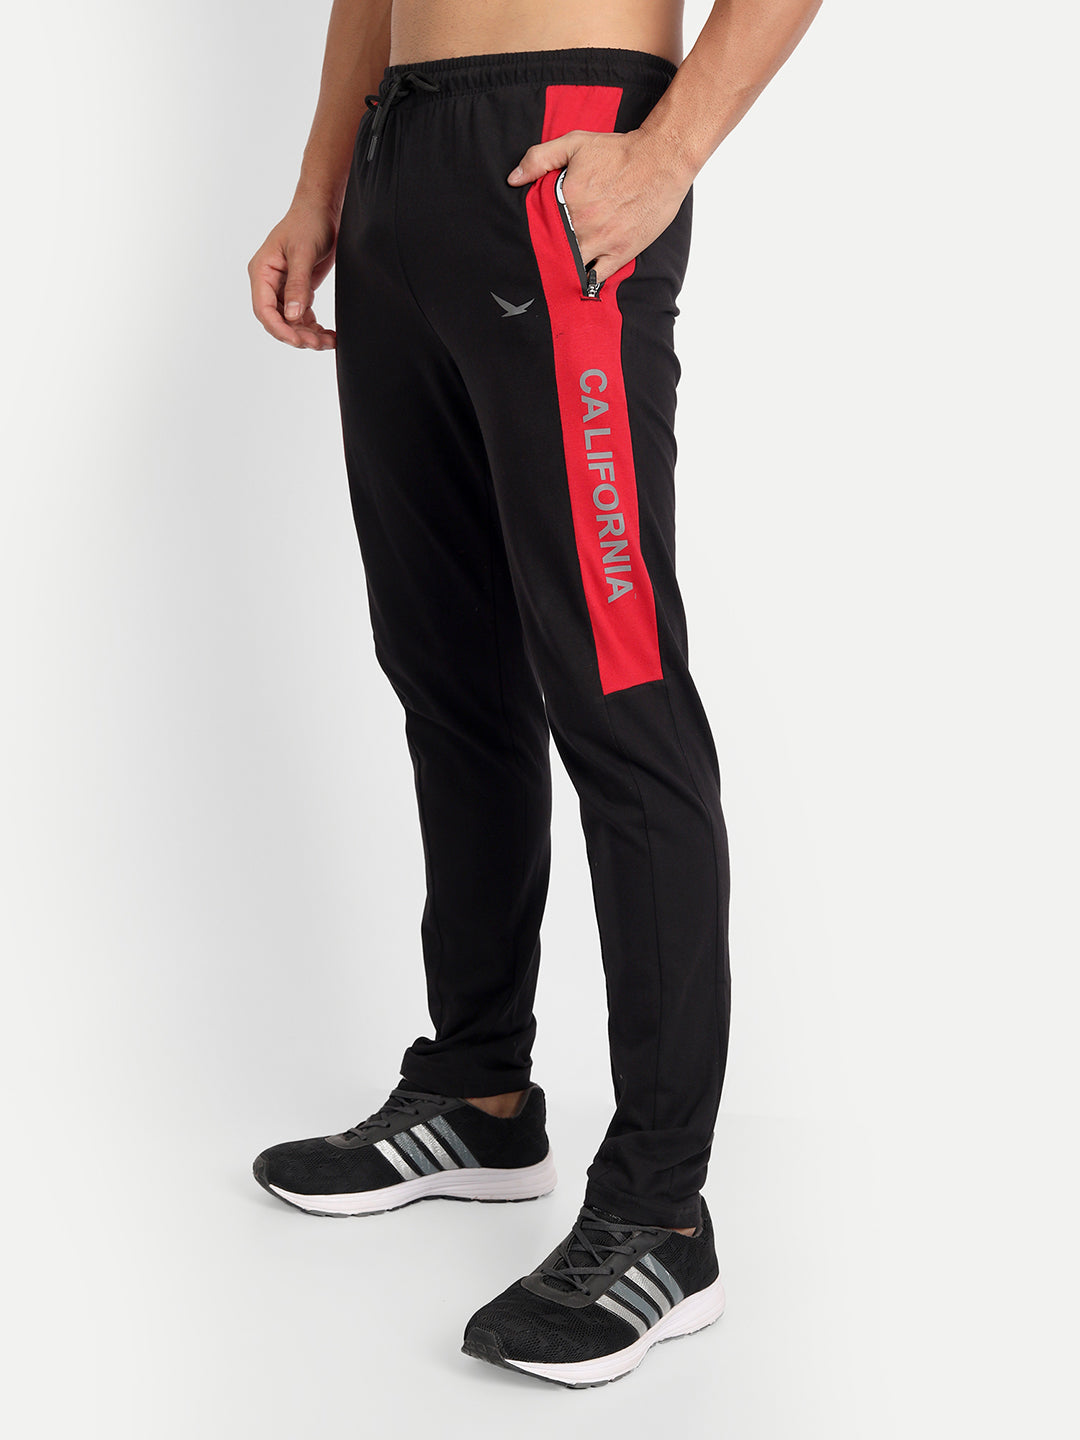 Reebok Men's Classics Track Pants (Black) in Wardha at best price by  Sportsline - Justdial